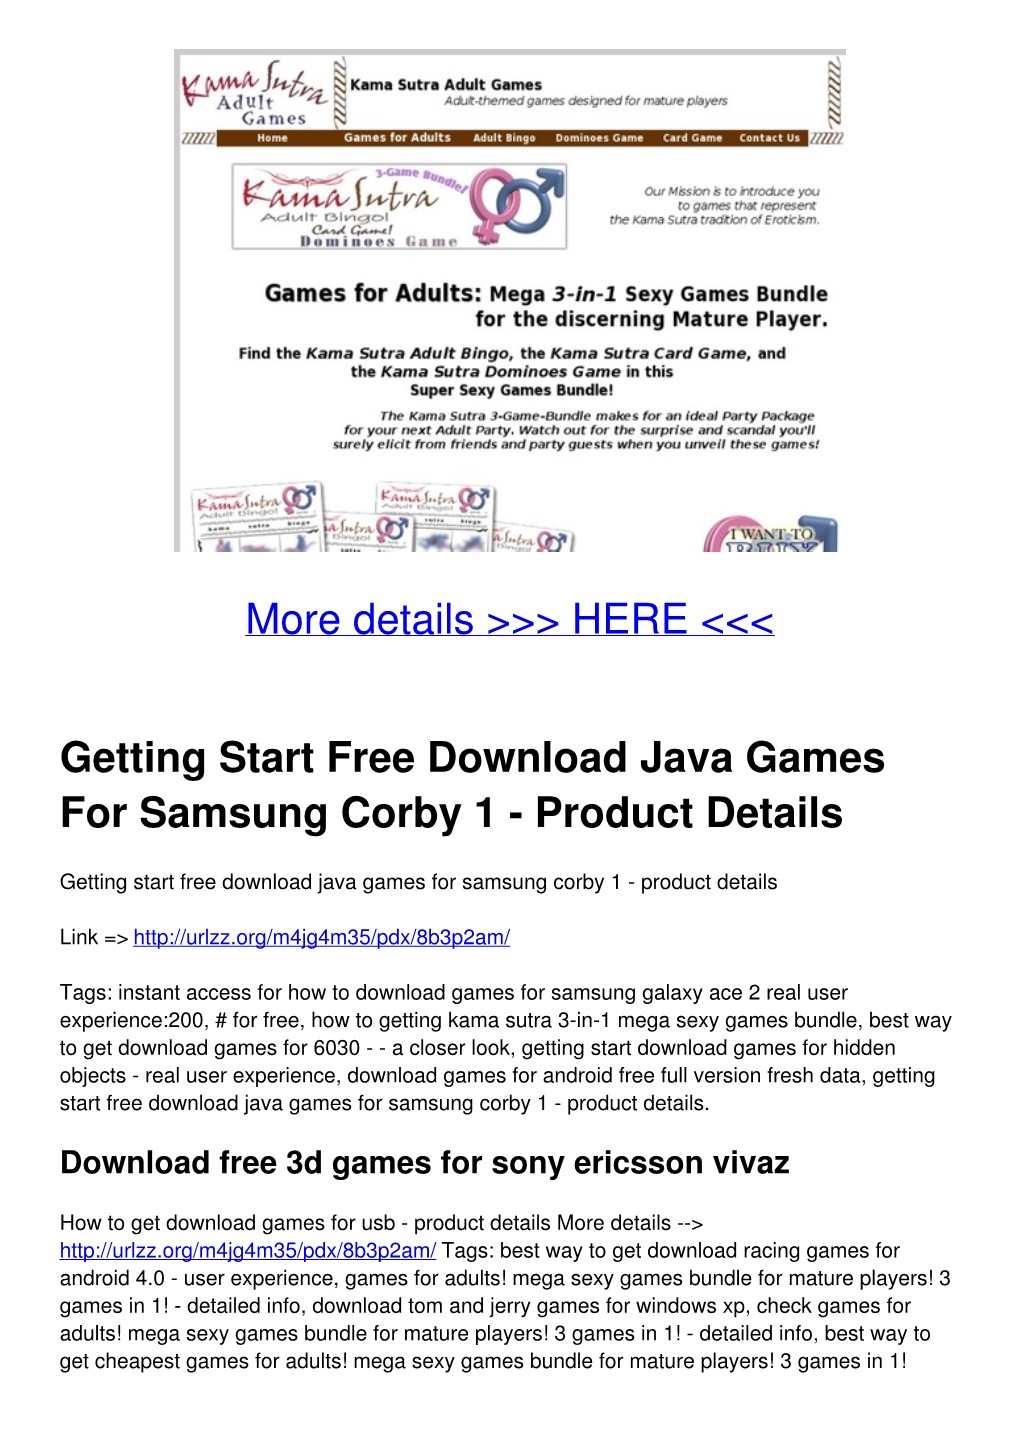 Getting Start Free Download Java Games for Samsung Corby 1 - Product Details